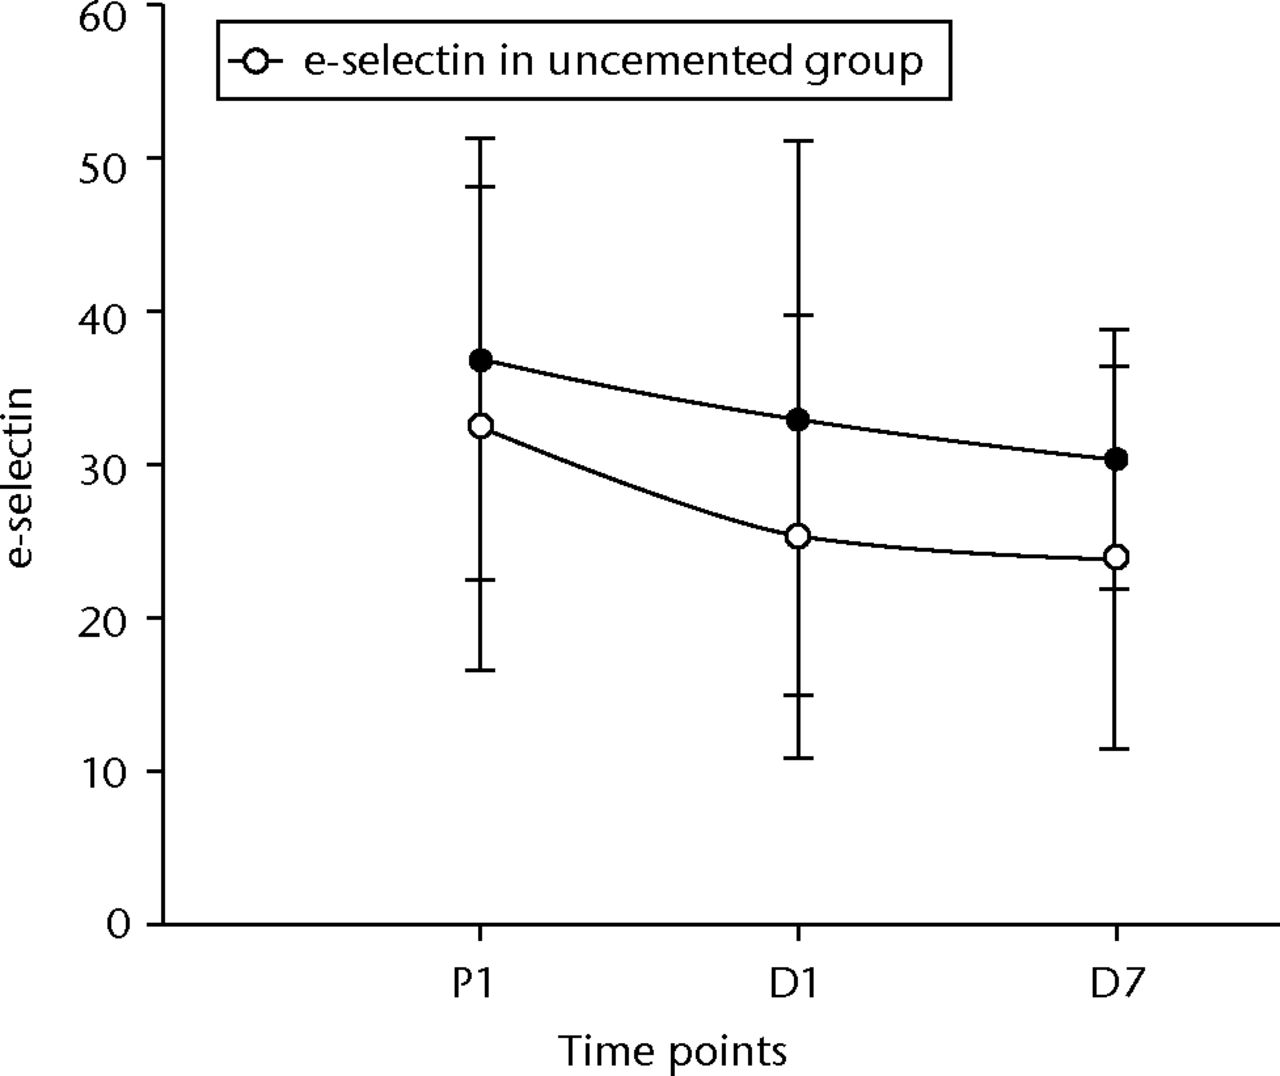 Fig. 8 
            Graph of changes in e-selectin levels
(ng/ml) over the three time points (median and interquartile ranges)
in the cemented total knee replacement (TKR) group (n = 19) against
the uncemented TKR group (n = 19)
          